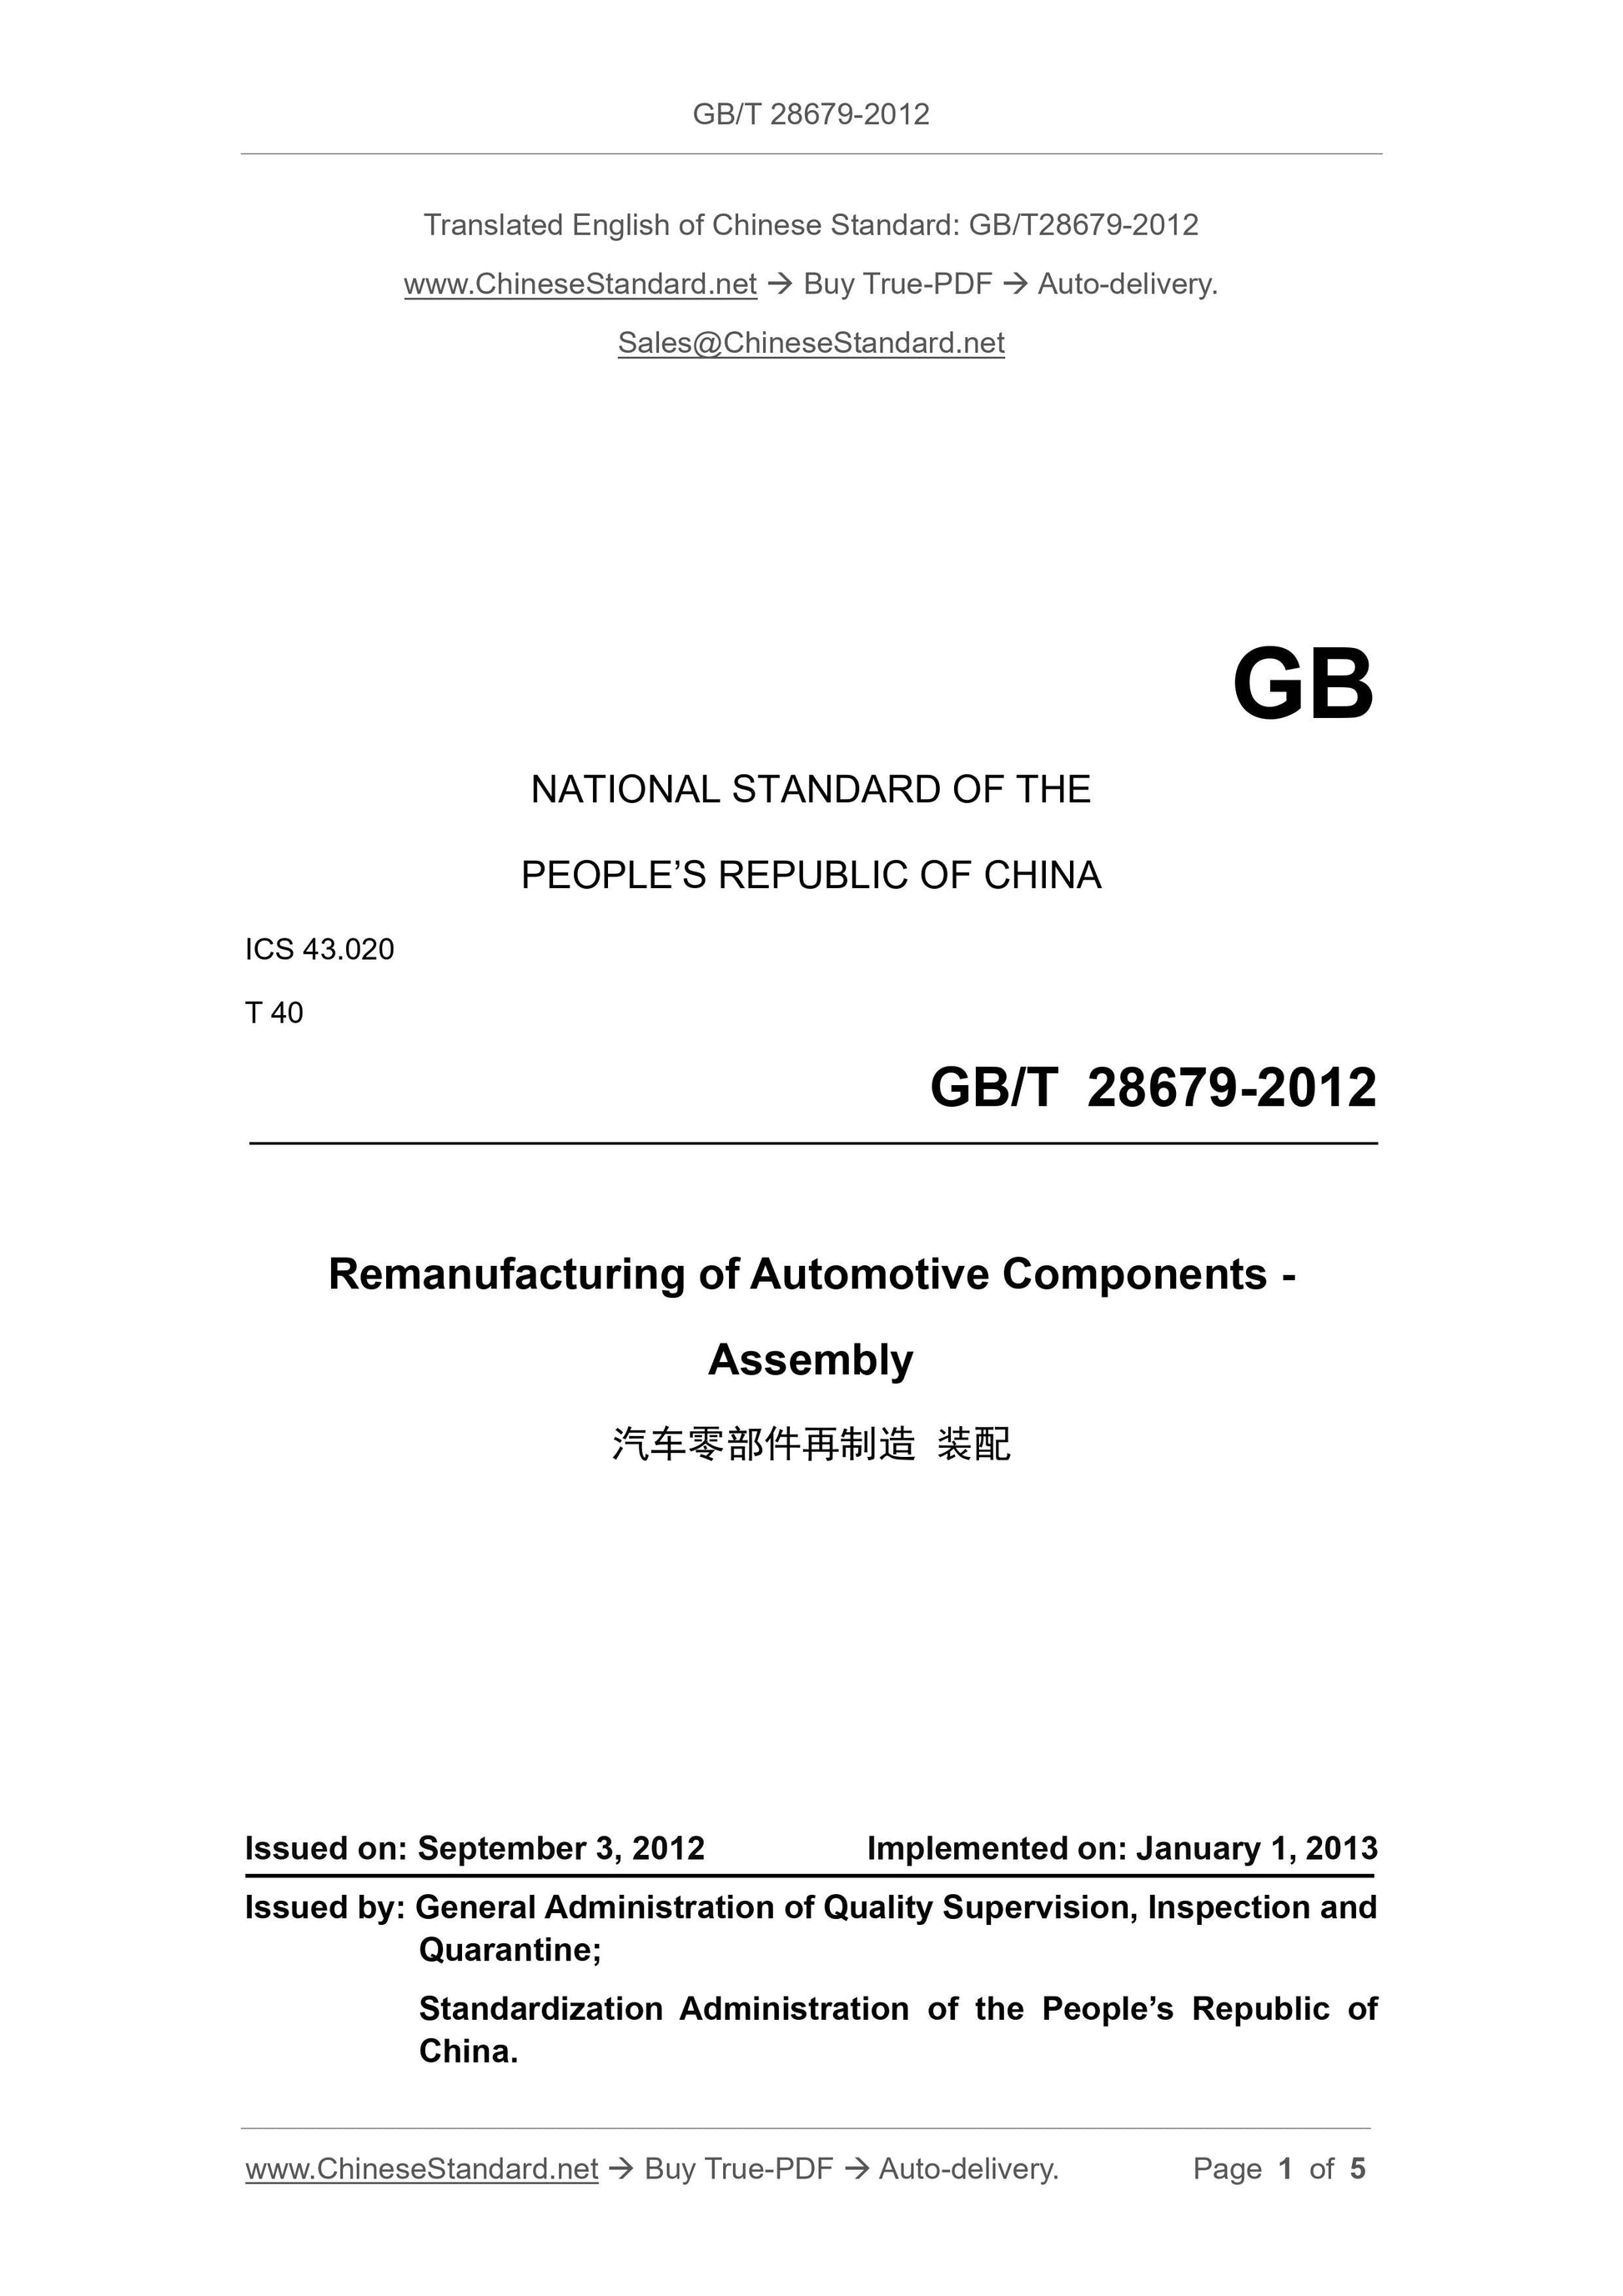 GB/T 28679-2012 Page 1